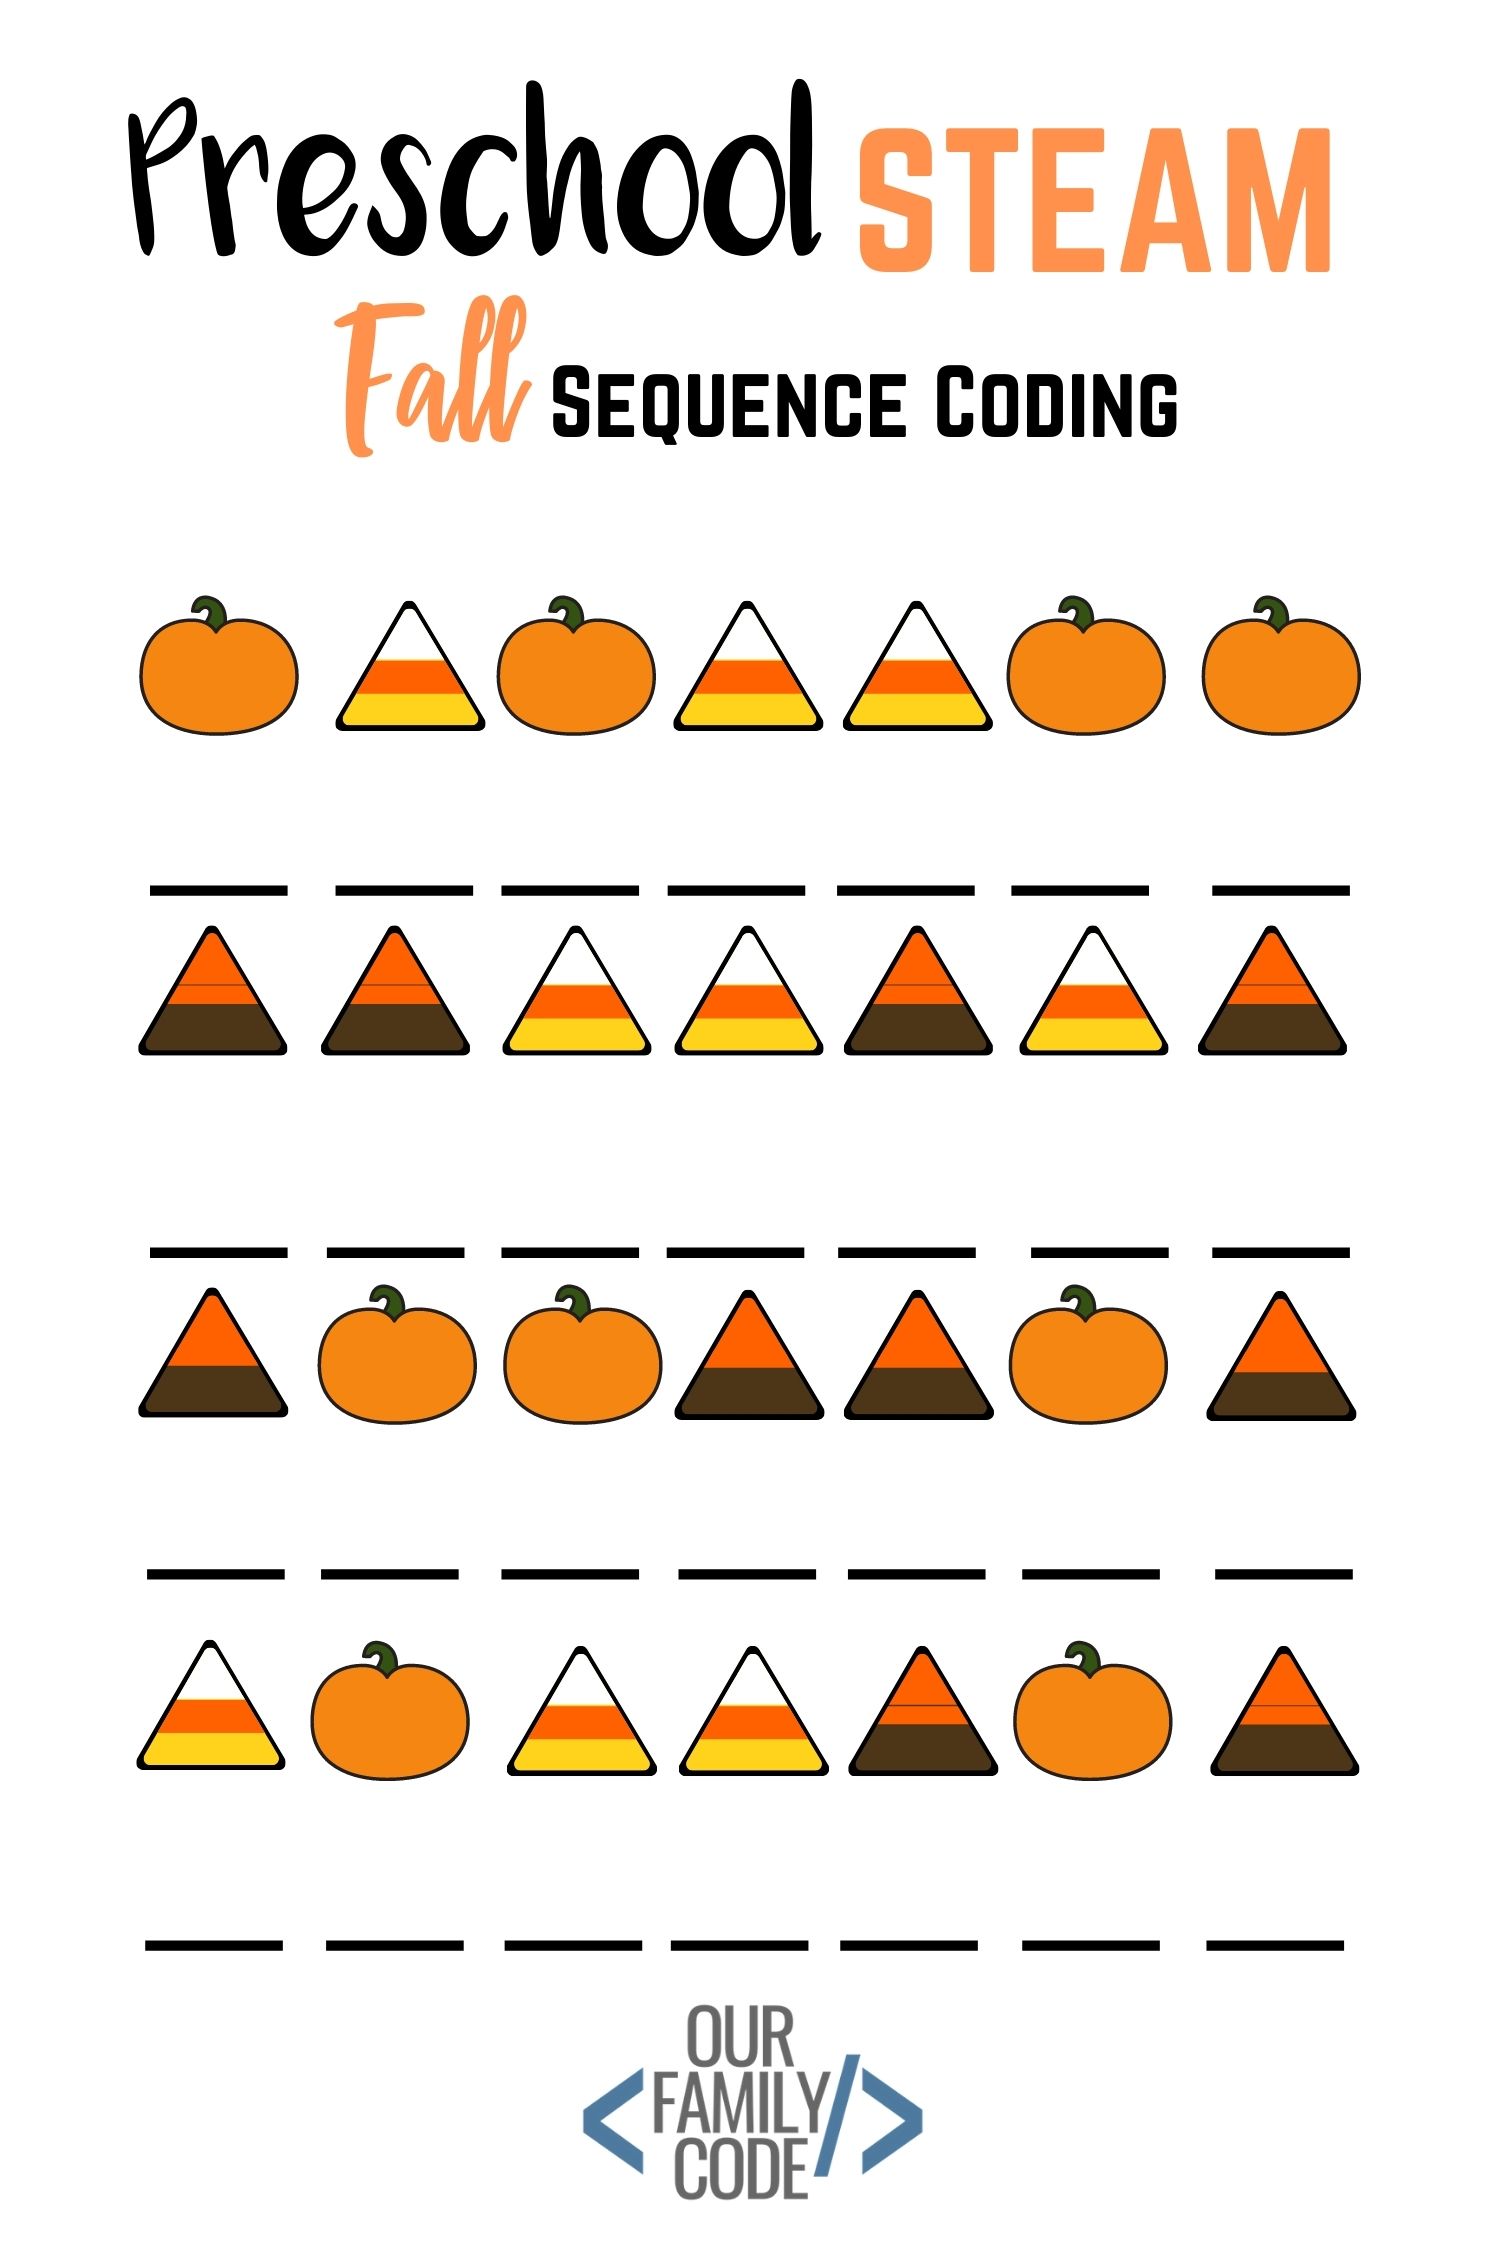 A picture of a preschool STEAM fall sequence coding worksheet.